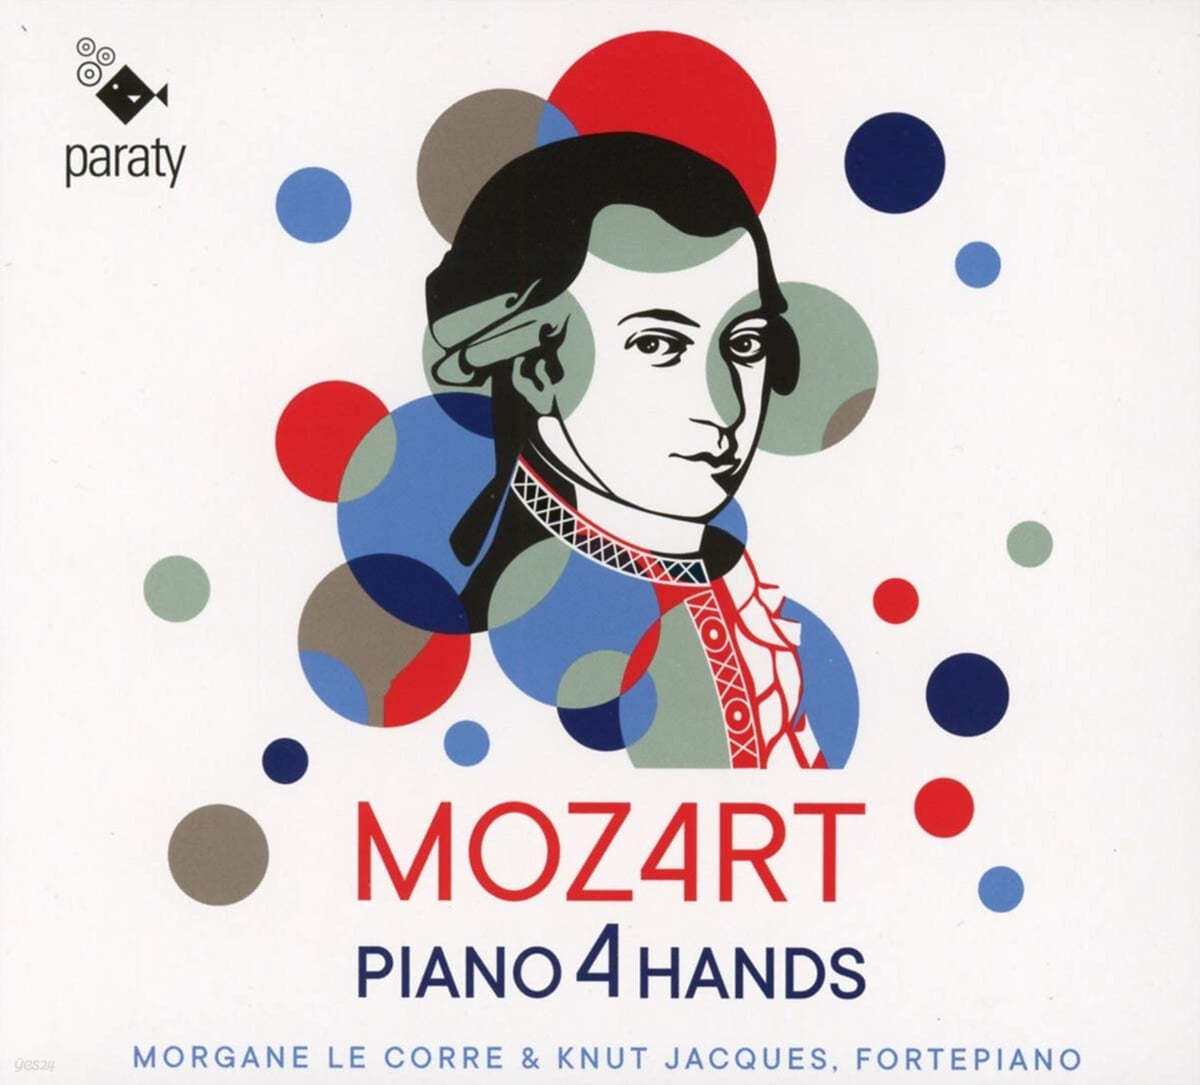 Knut Jacques / Morgane Le Corre 모차르트: 네 손을 위한 피아노곡 (Mozart: Piano Works for Four Hands) 